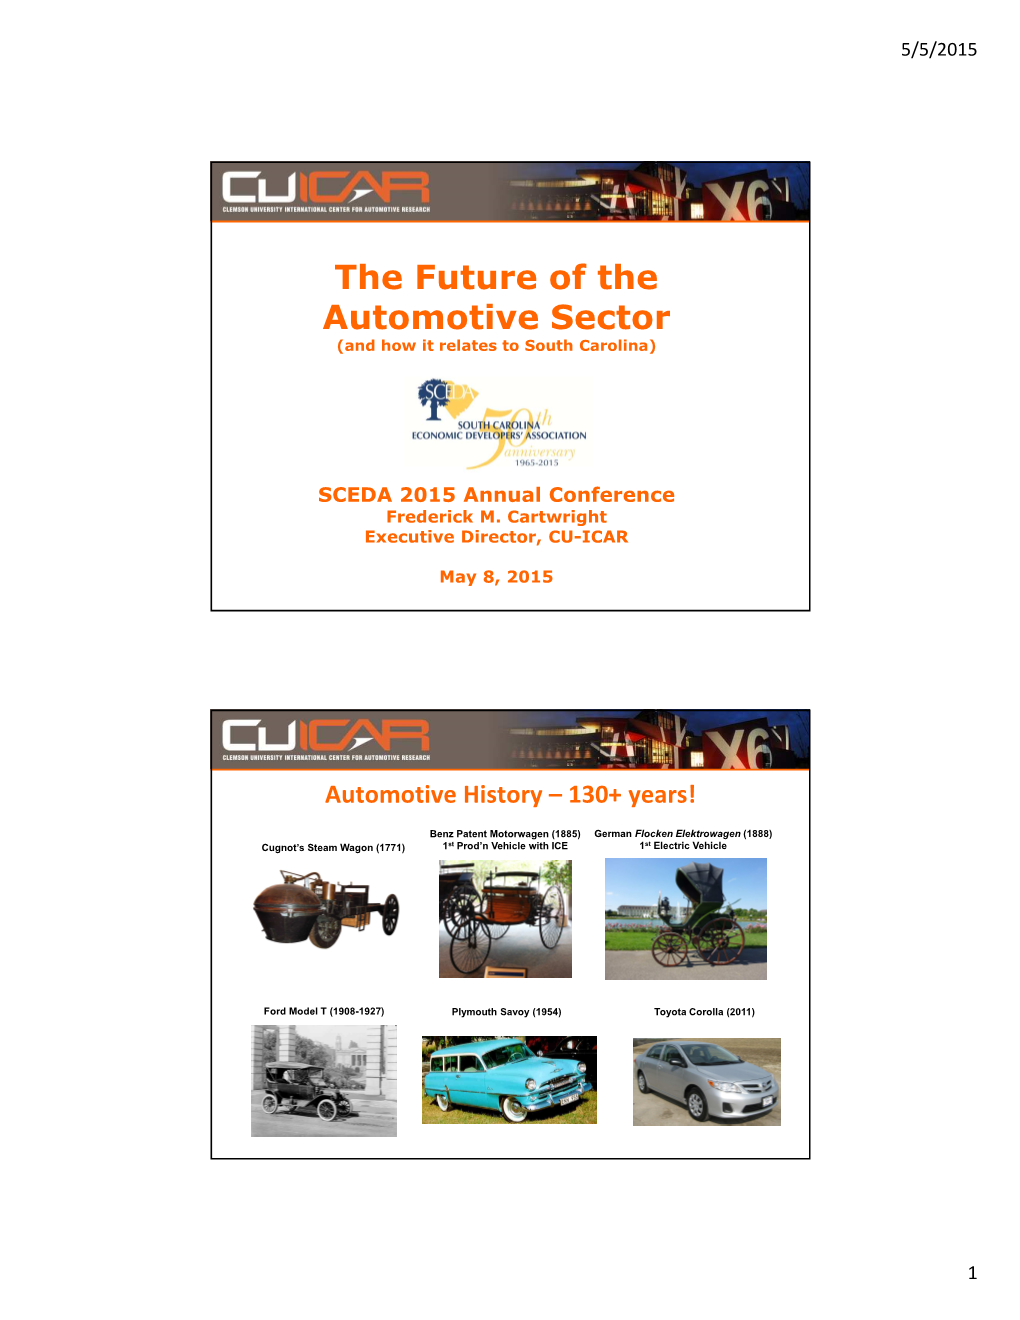 The Future of the Automotive Sector (And How It Relates to South Carolina)